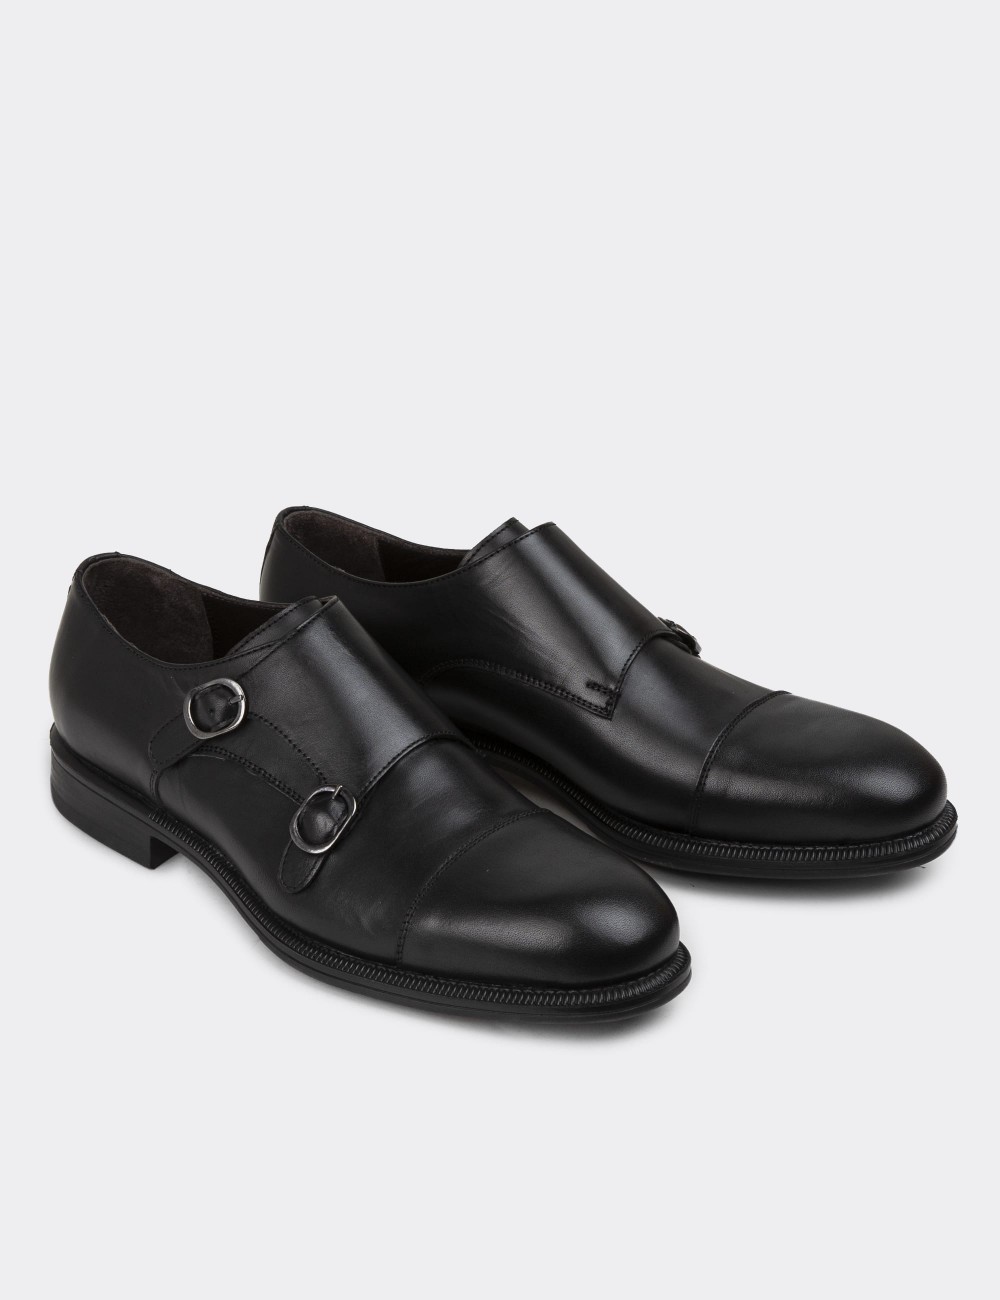 Black Leather Double Monk-Strap Classic Shoes - 01838MSYHC01